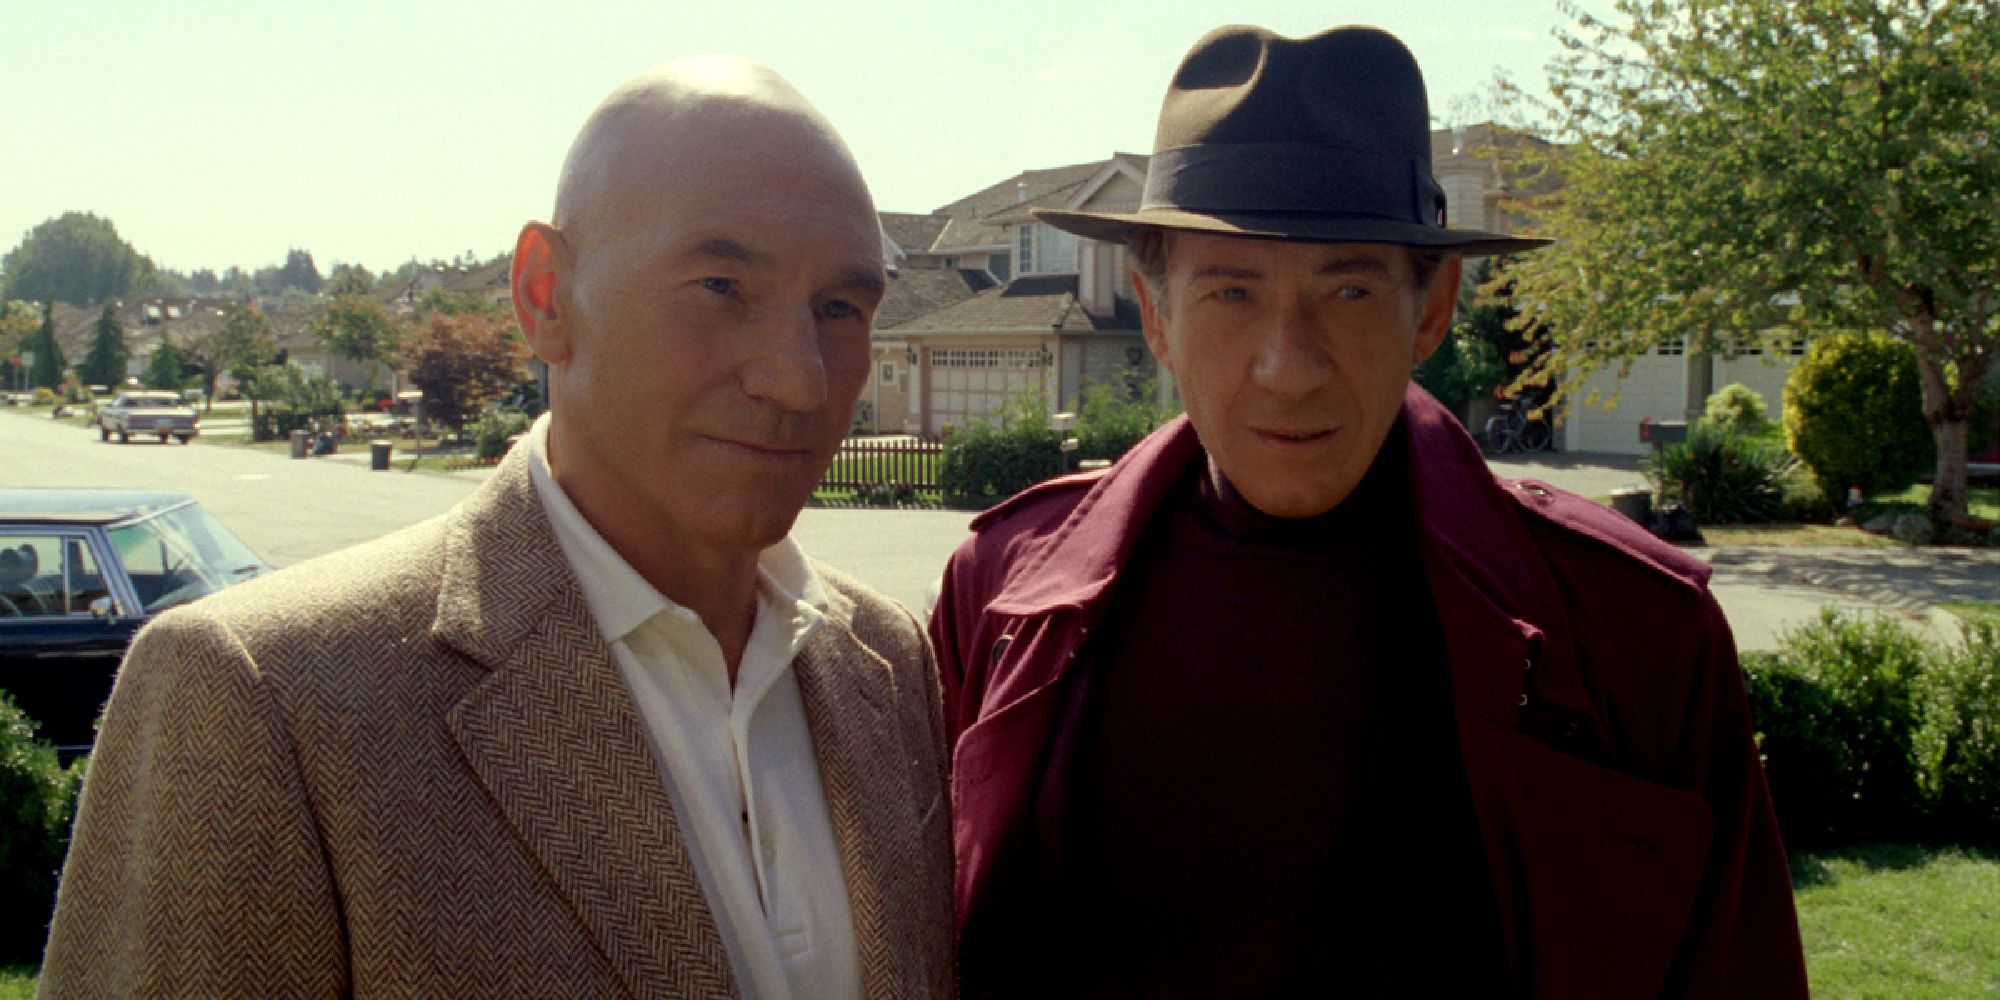 Young Charles and Magneto standing on a street in X-Men_ The Last Stand - 2006